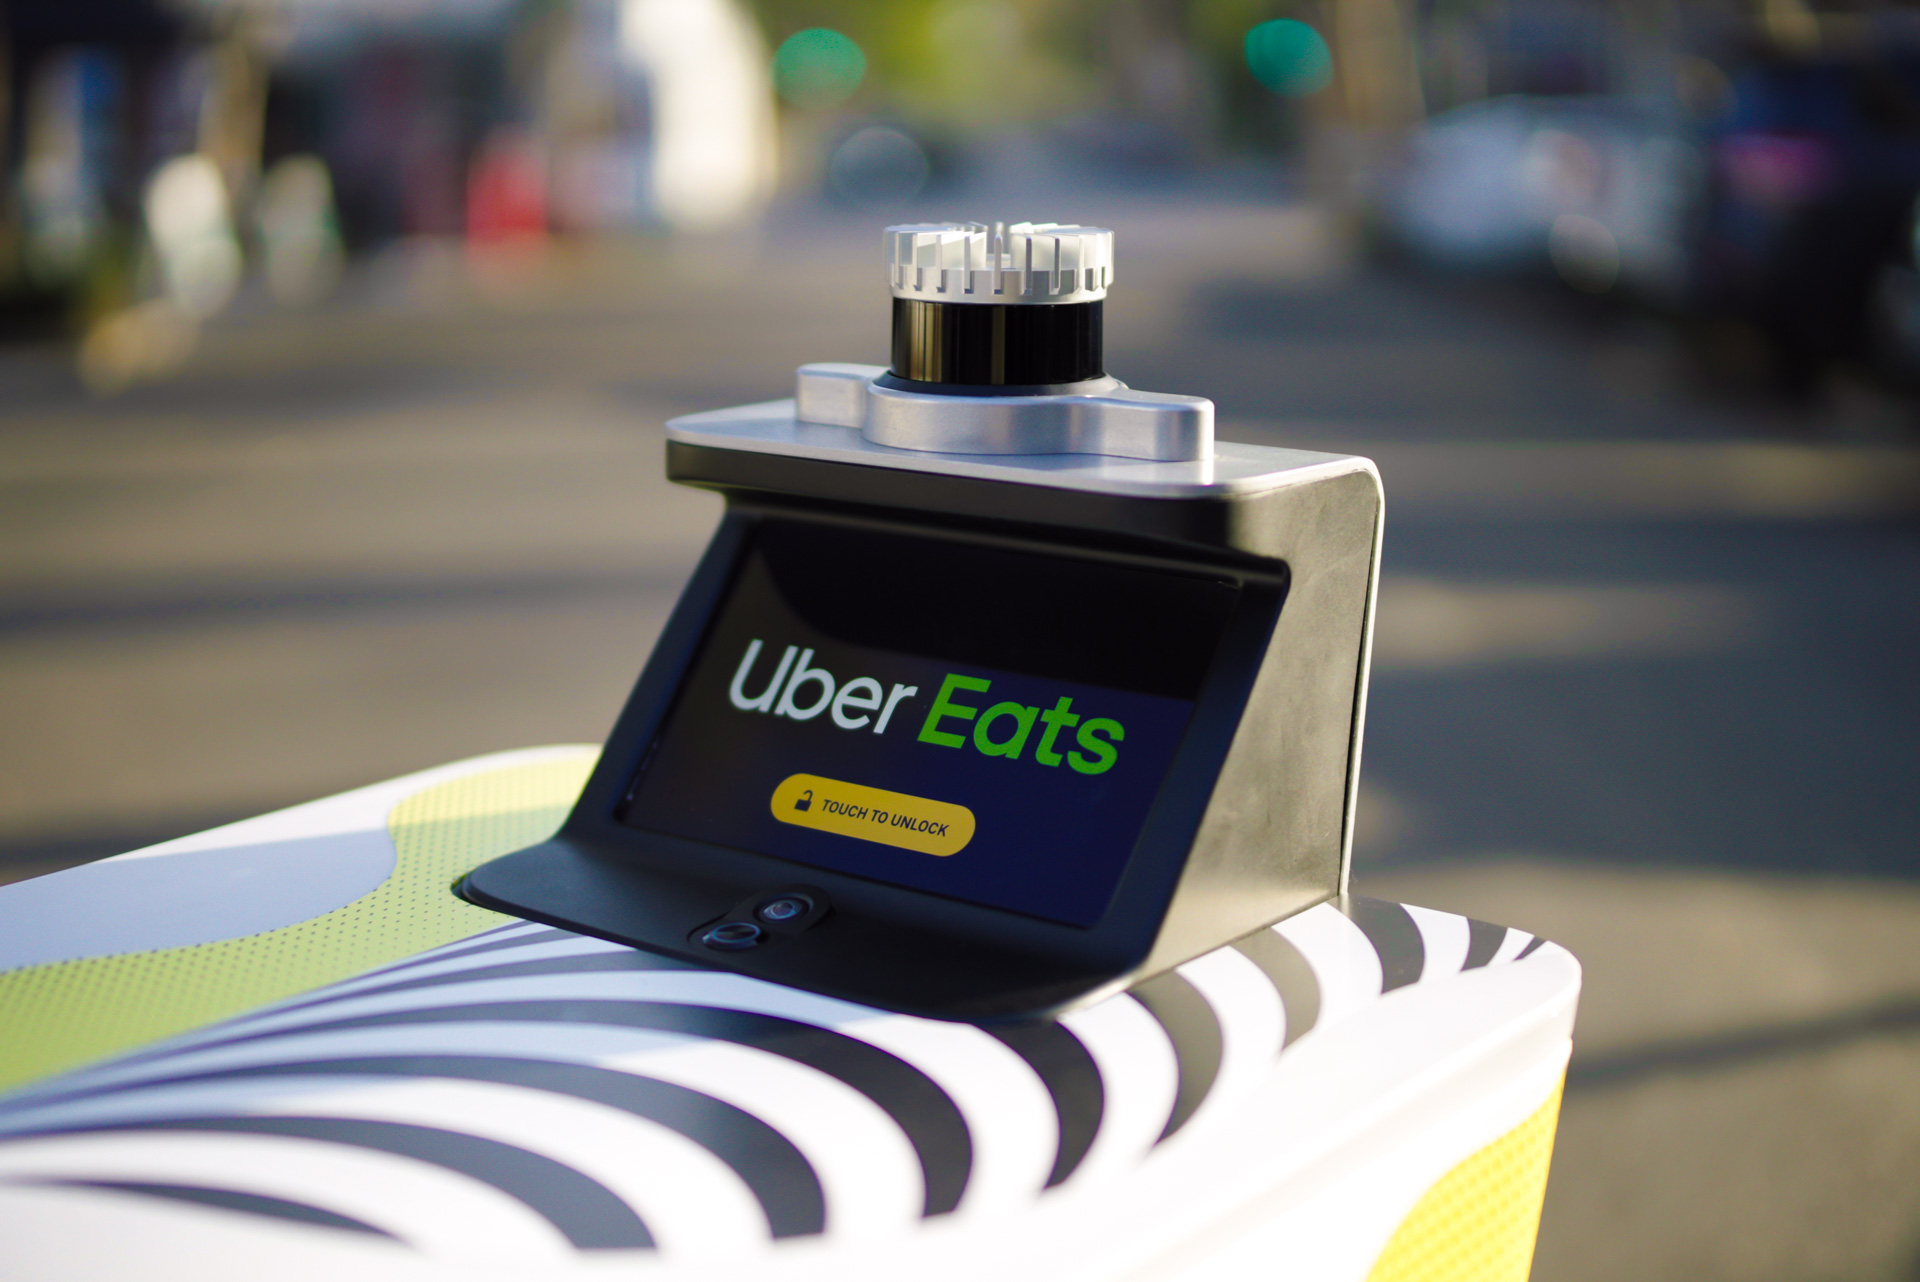 service robot with uber eats brand